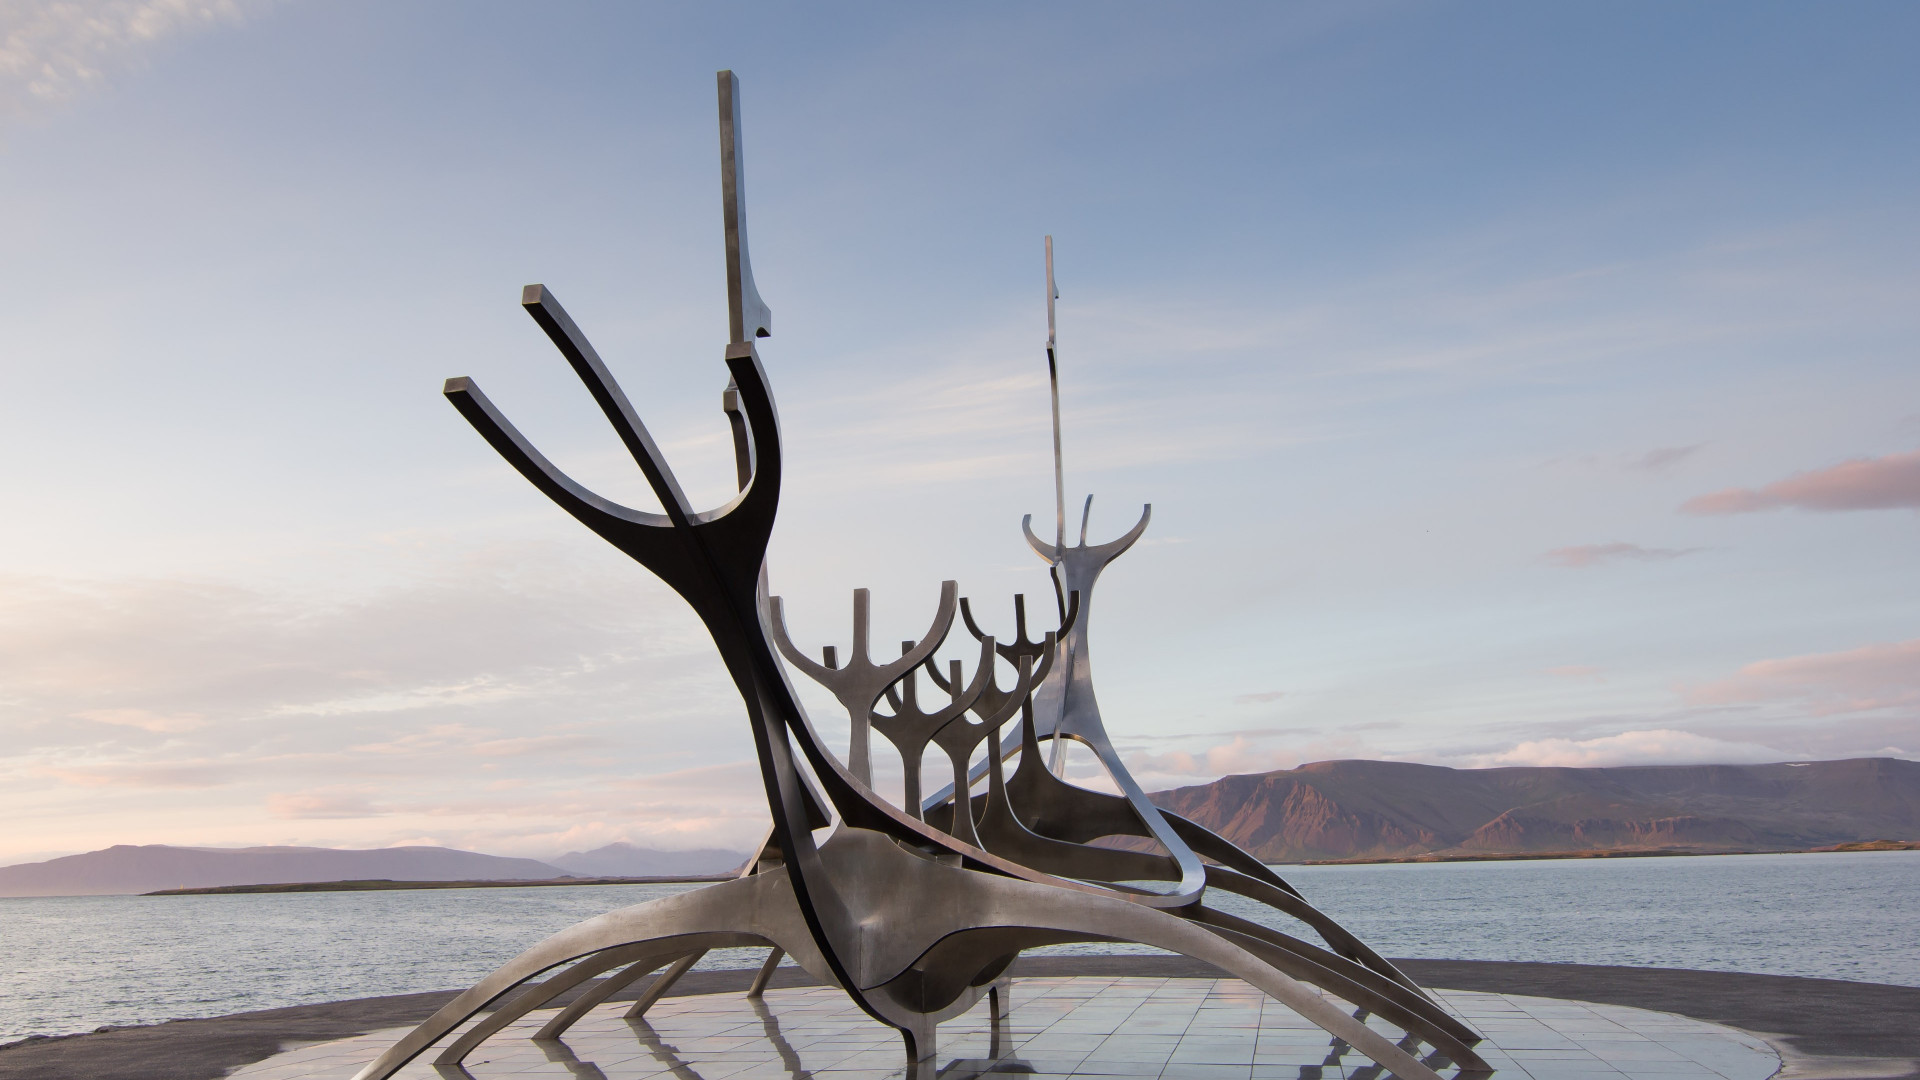 The Sun Voyager from Reykjavik, Iceland wallpaper 1920x1080